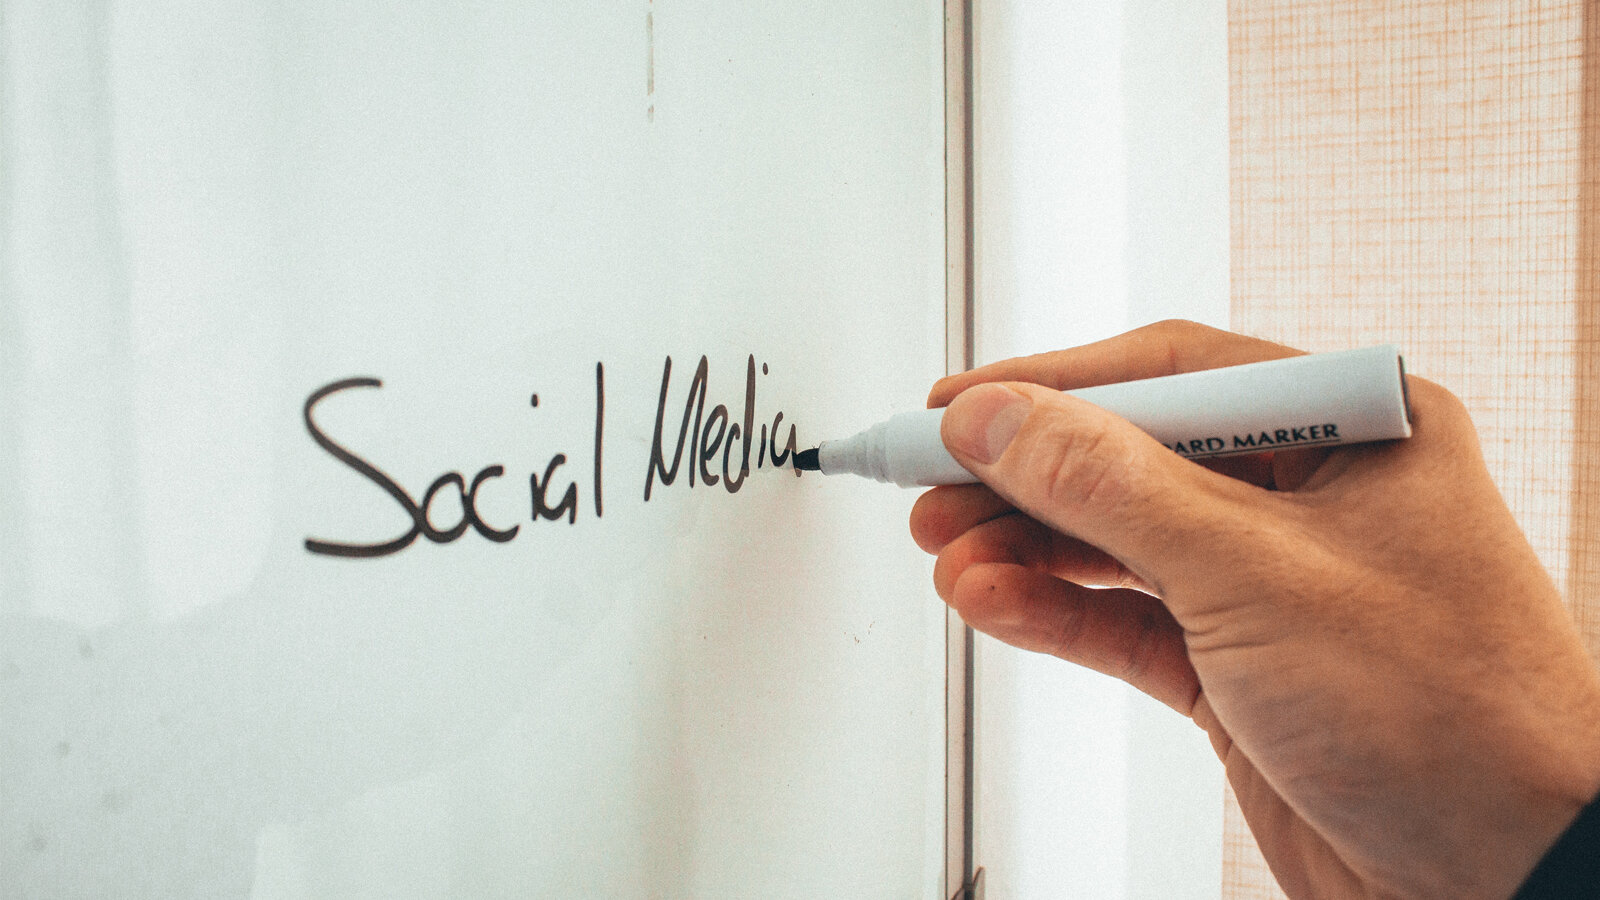 A hand holds a marker an writes Social Media on a white board.